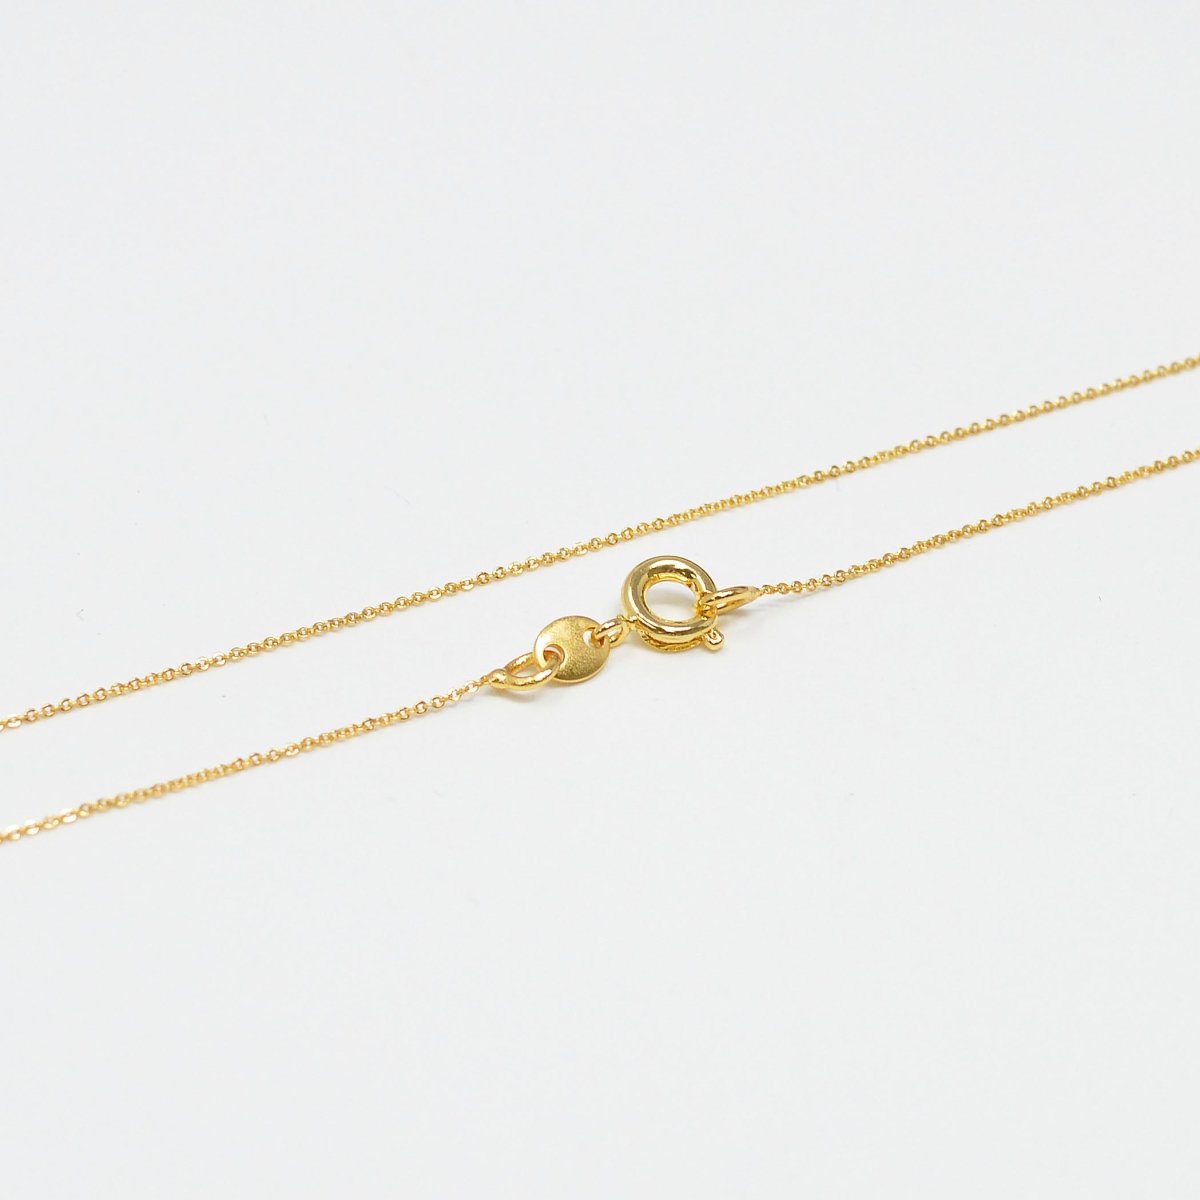 Dainty 24K Gold Filled 1mm Rolo Cable 18 Inch Chain Necklace w/ Spring Ring | CN-989 - DLUXCA